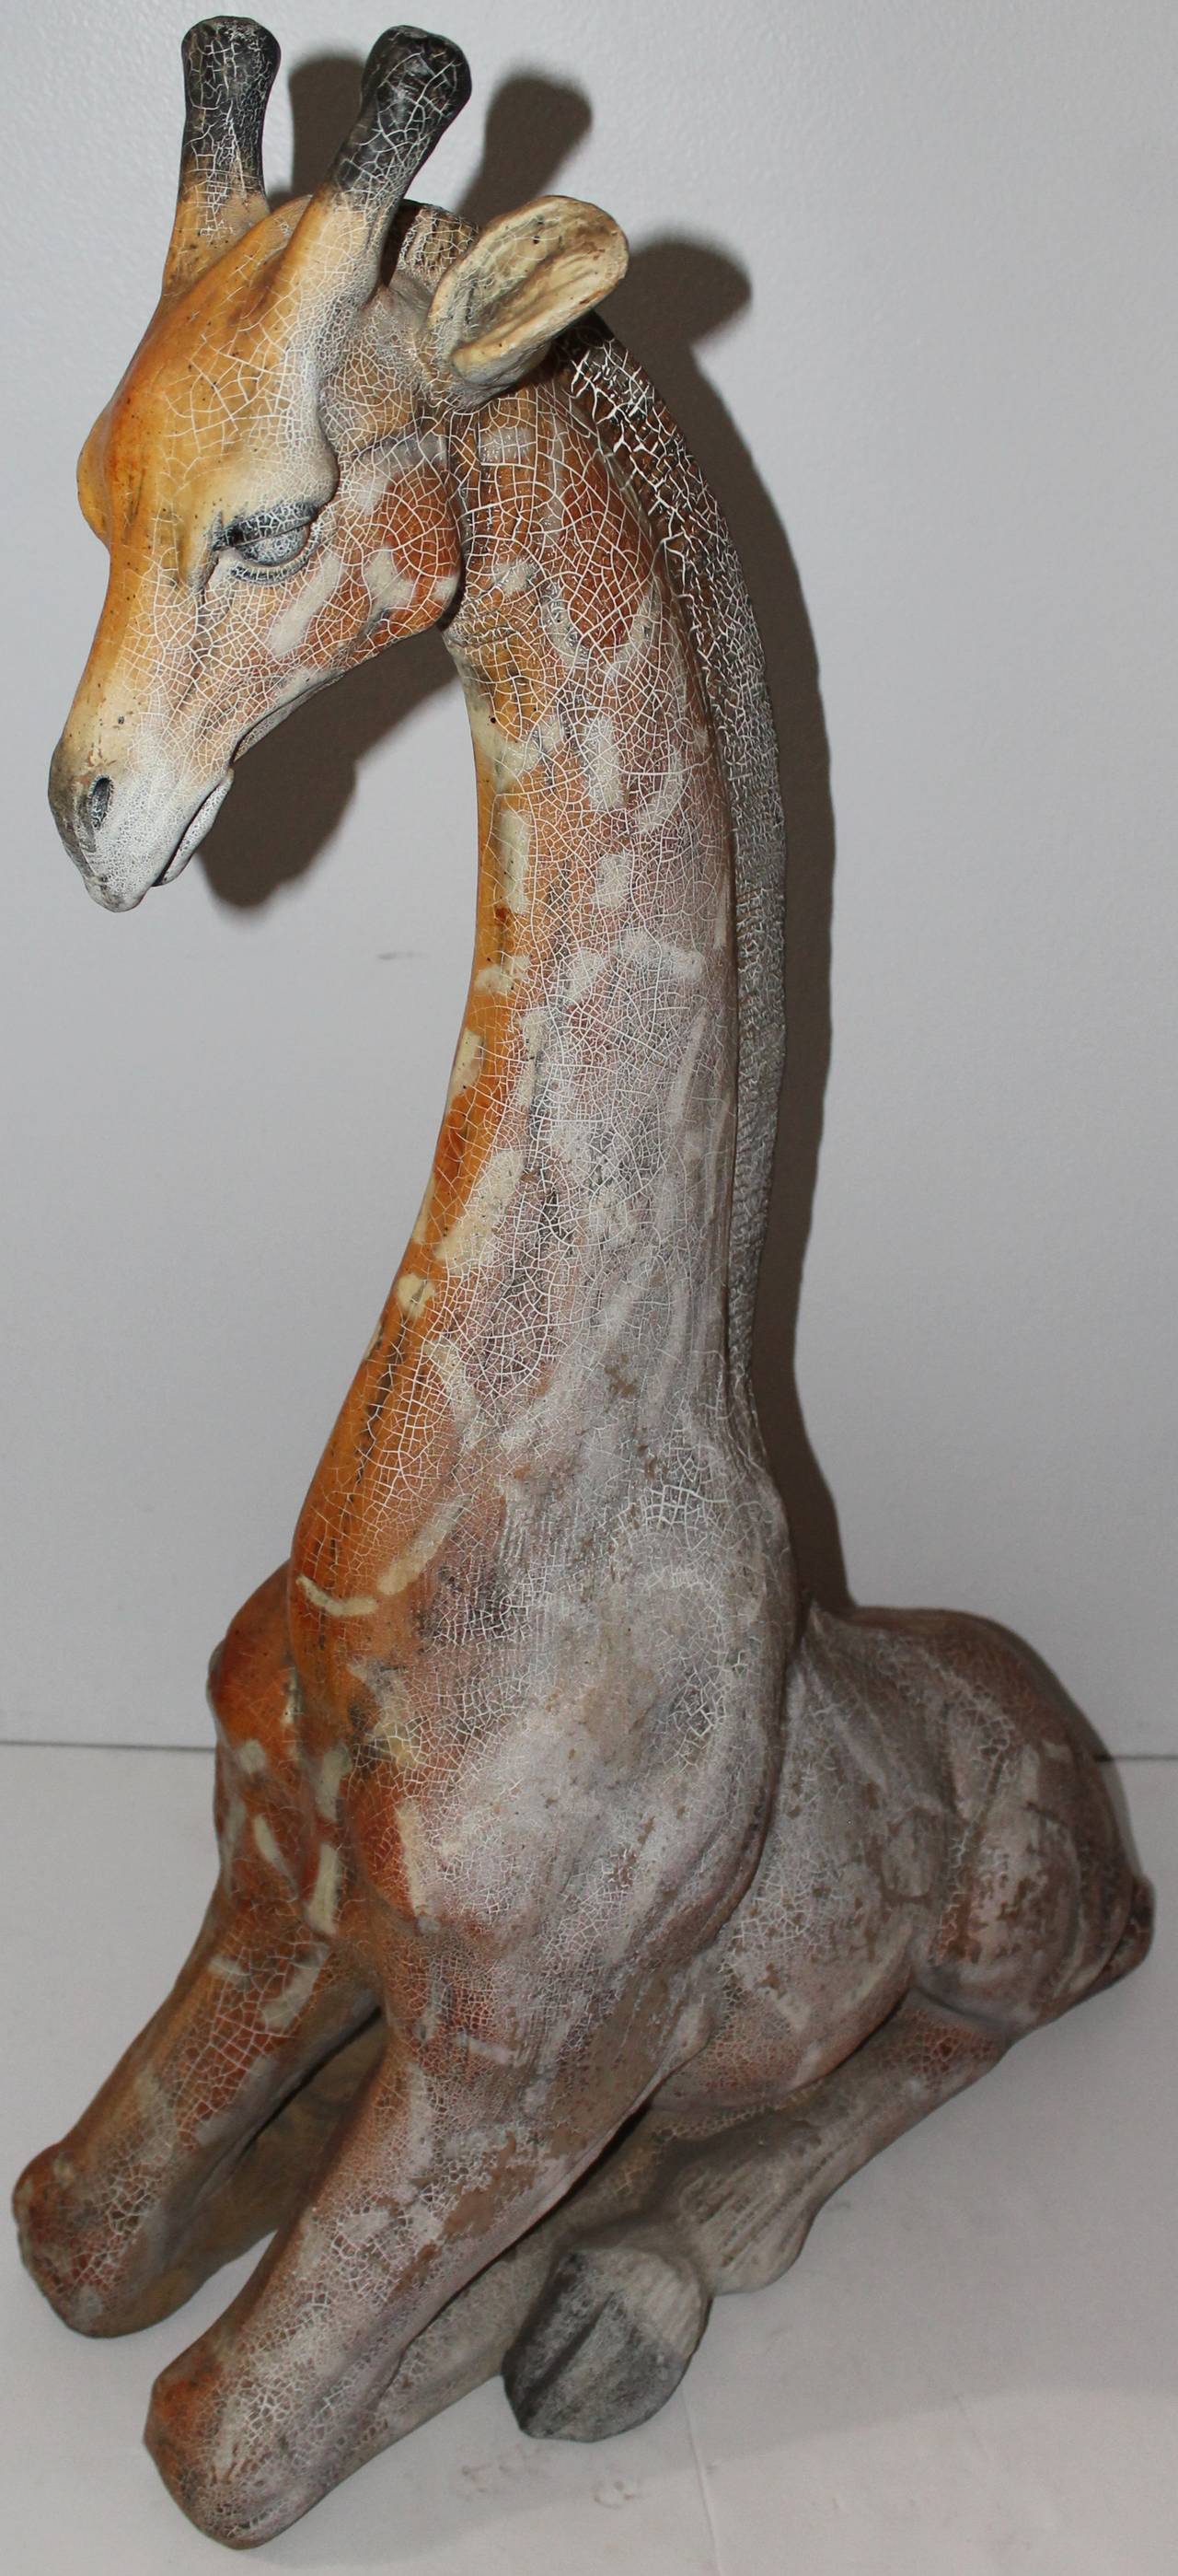 This cool folky original painted and molded giraffe. This giraffe was probably from a kiddy ride. It is made from molded resin and has a wonderful crackled, alligatored finish. The surface is the best! Onn side is totally sun faded and one side not.